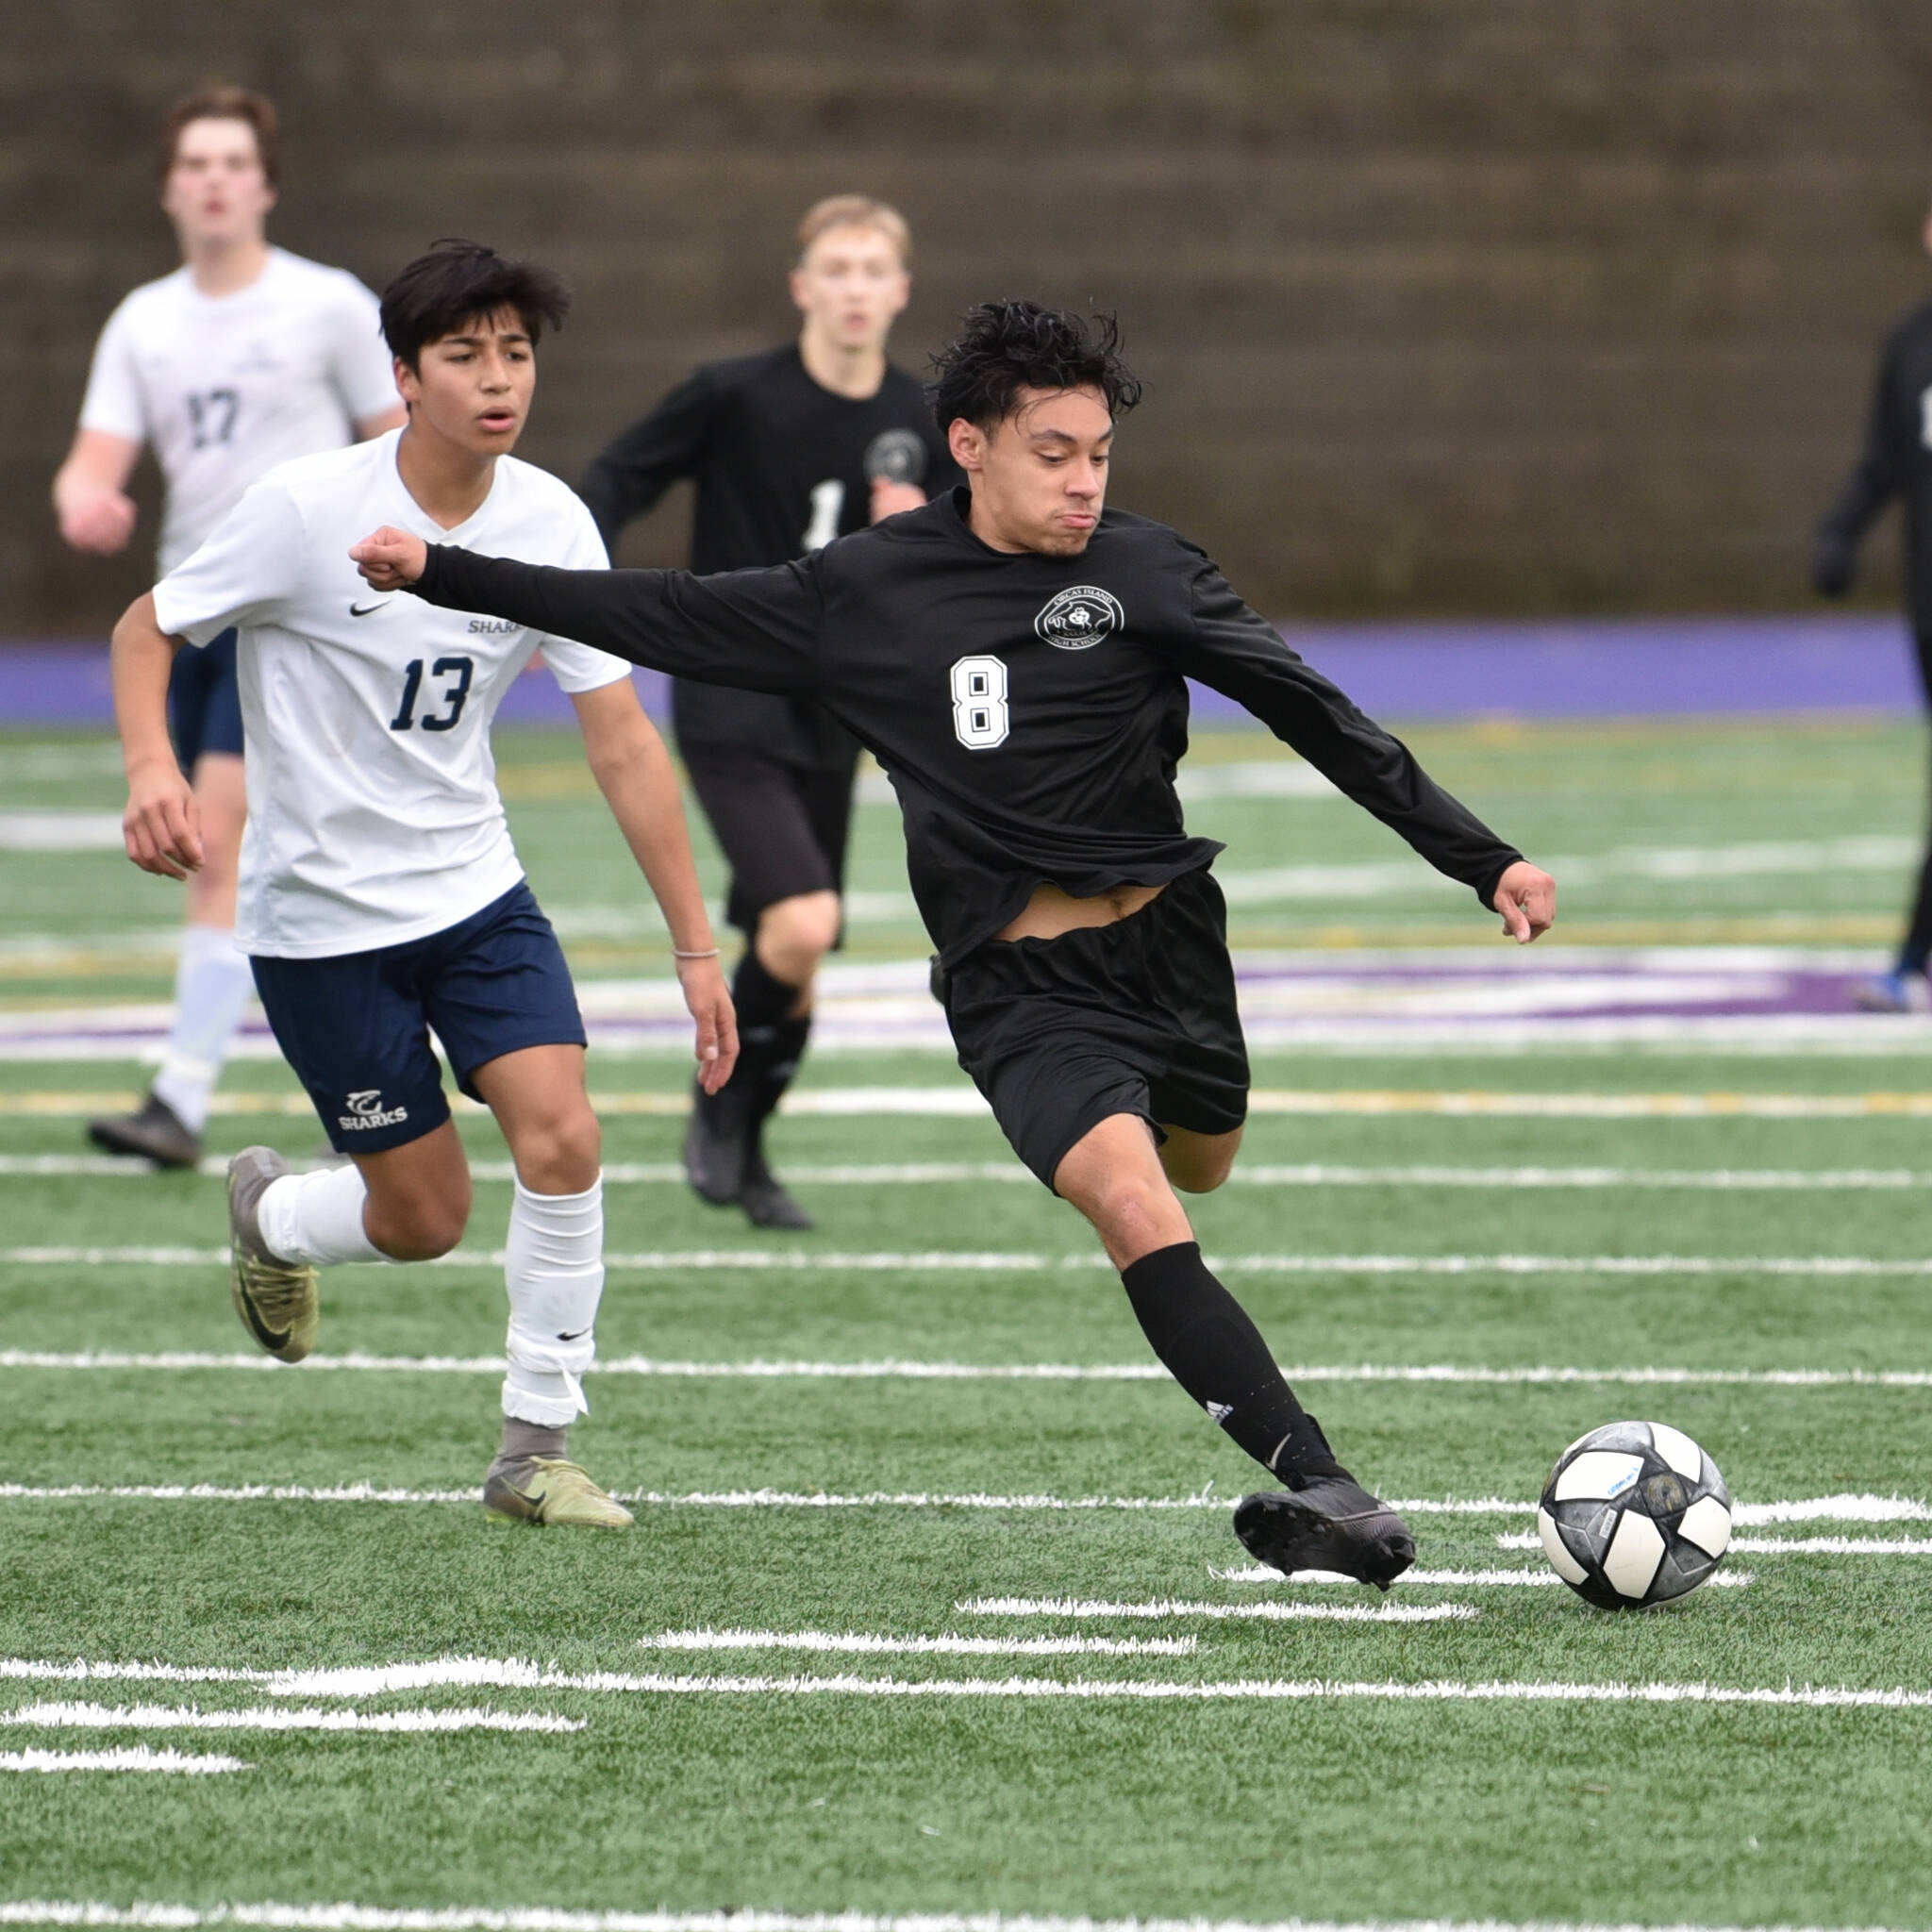 Chris Sutton photo
With the might and fury of a jungle cat Senior William Ibarra smashes a shot on goal for the Orcas Vikings. The win has now put Orcas in the Final Four of the State Playoffs.